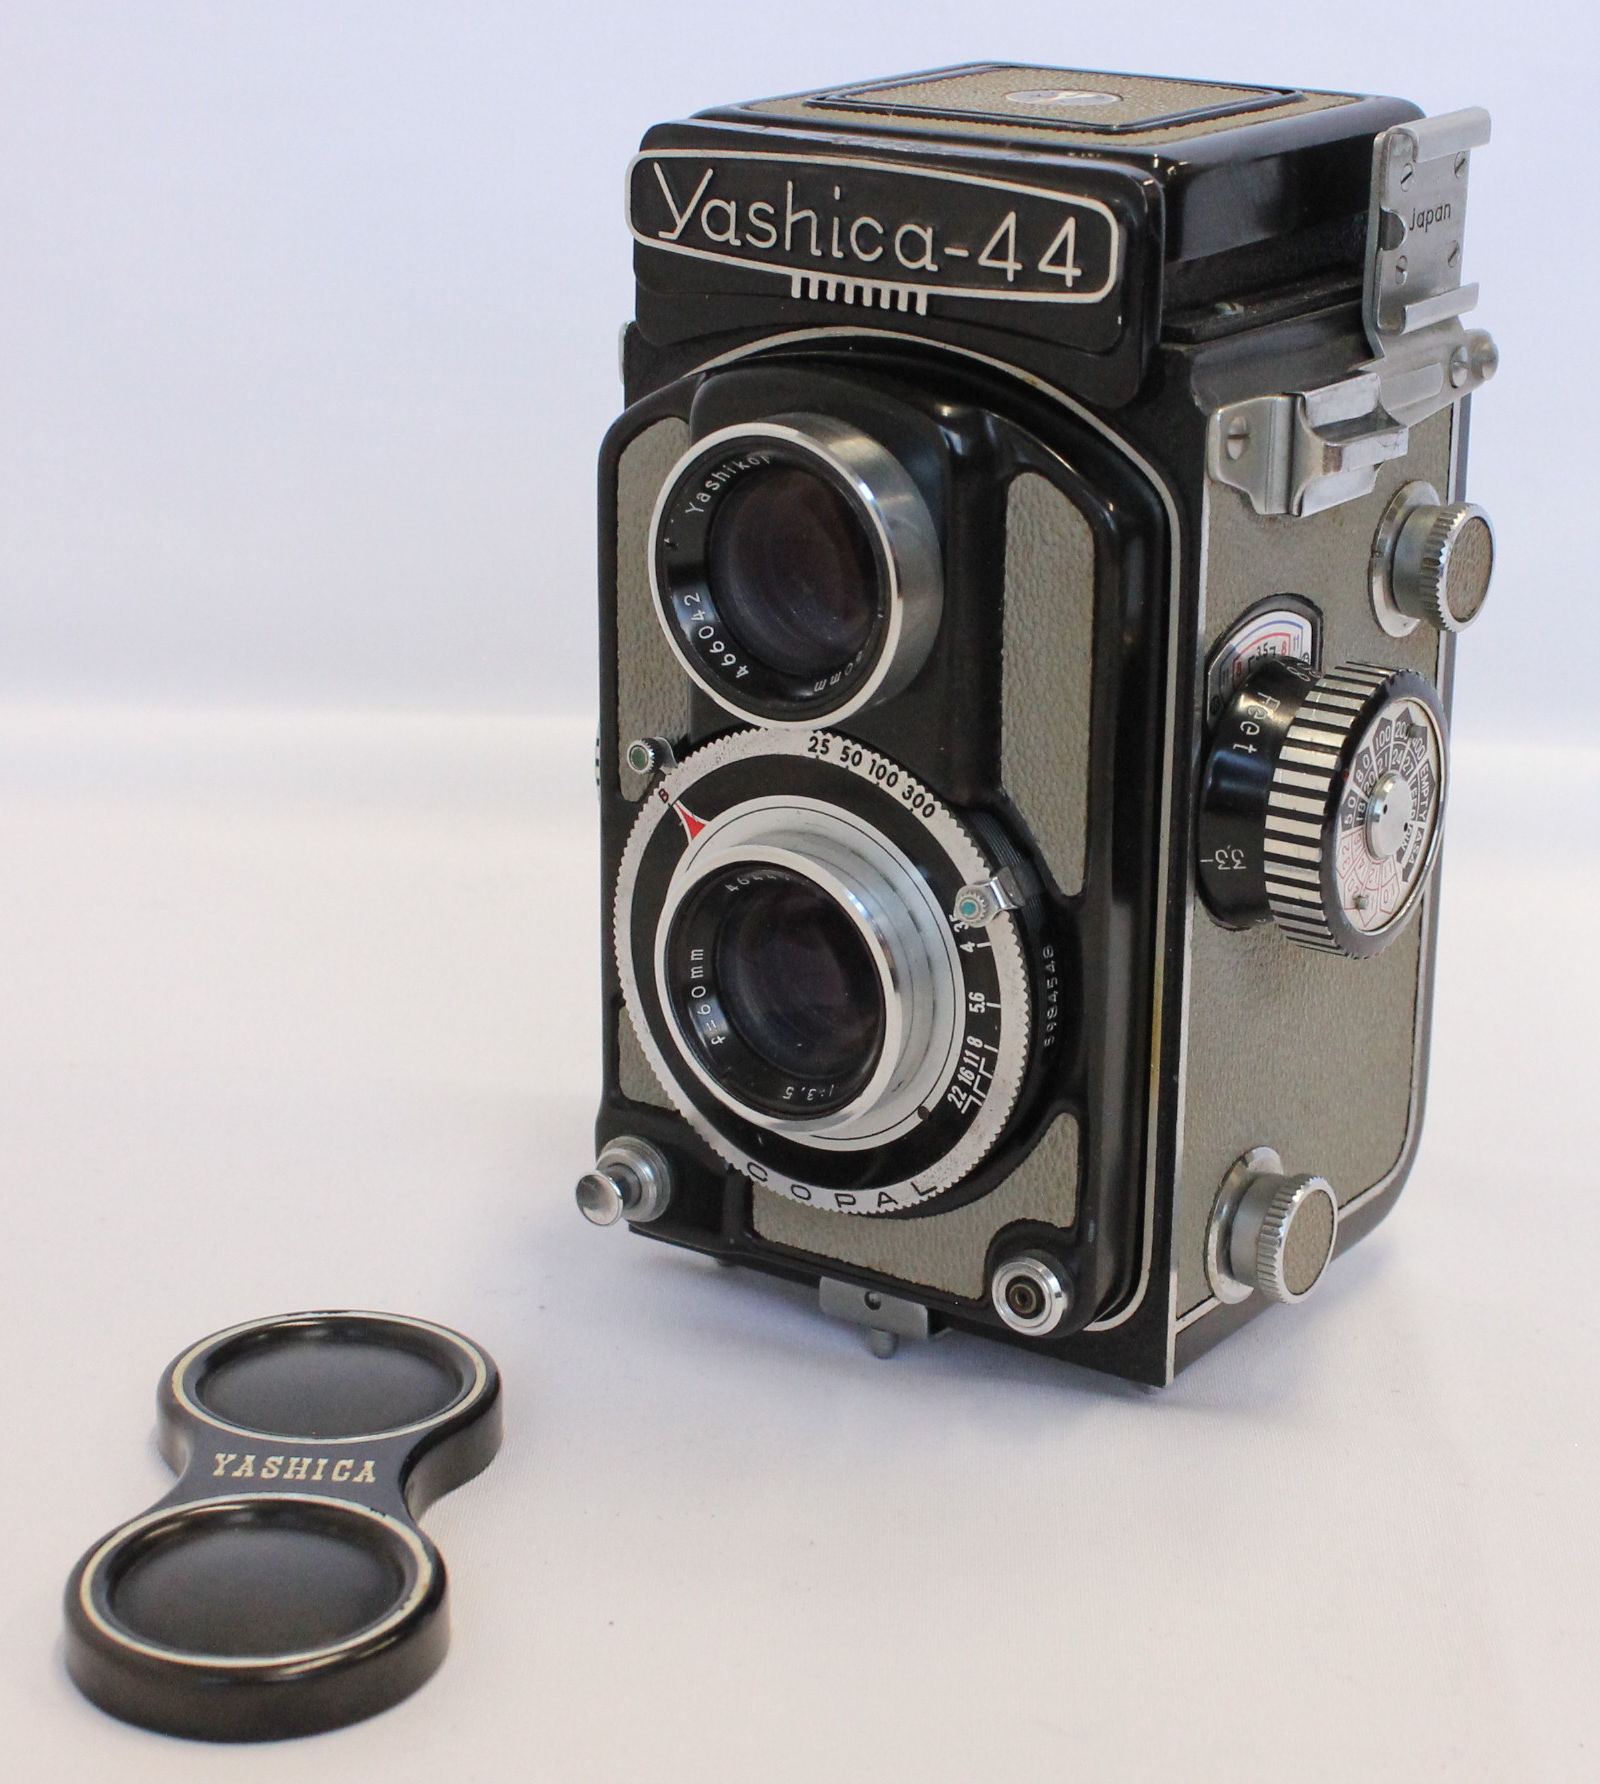   Yashica 44 A 127 4x4 TLR Camera w/ Yashikor 60mm F3.5 Lens from Japan Photo 0